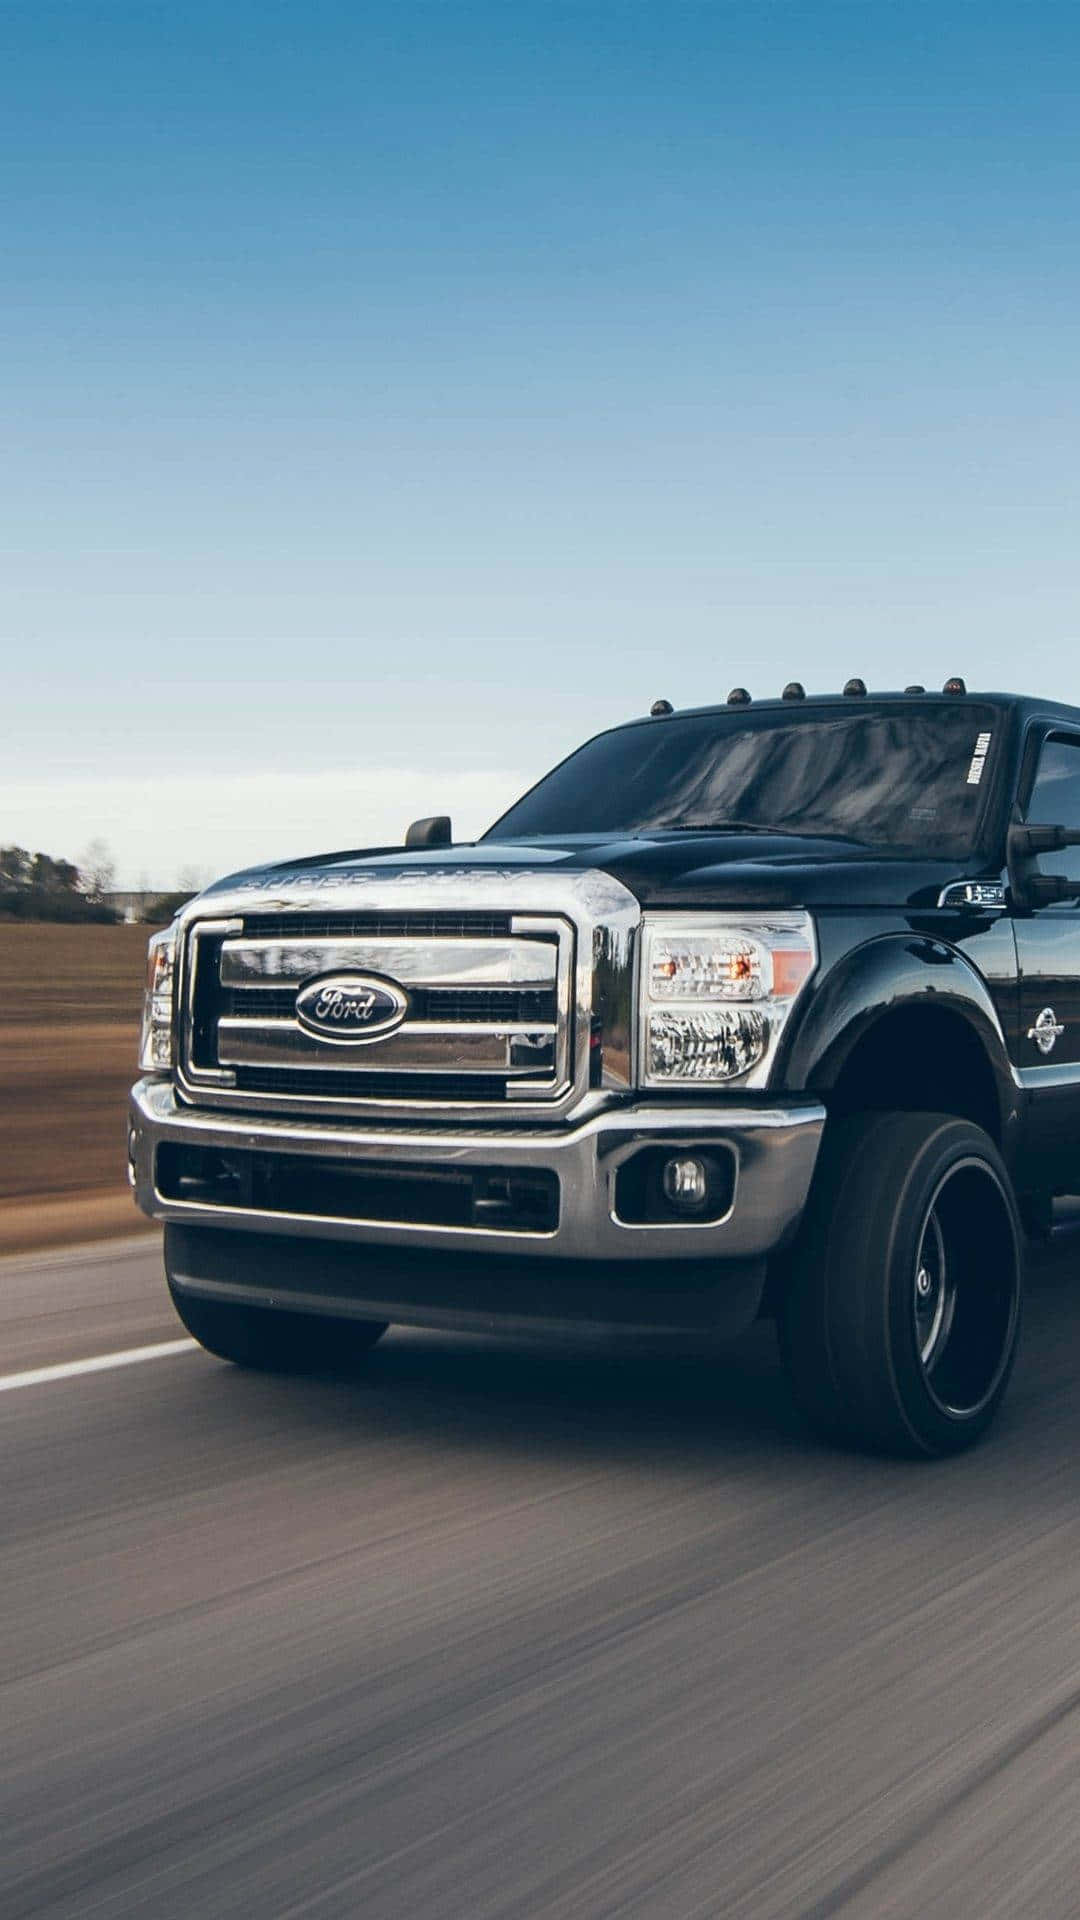 A Black Ford Super Duty Truck Is Driving Down The Road Background